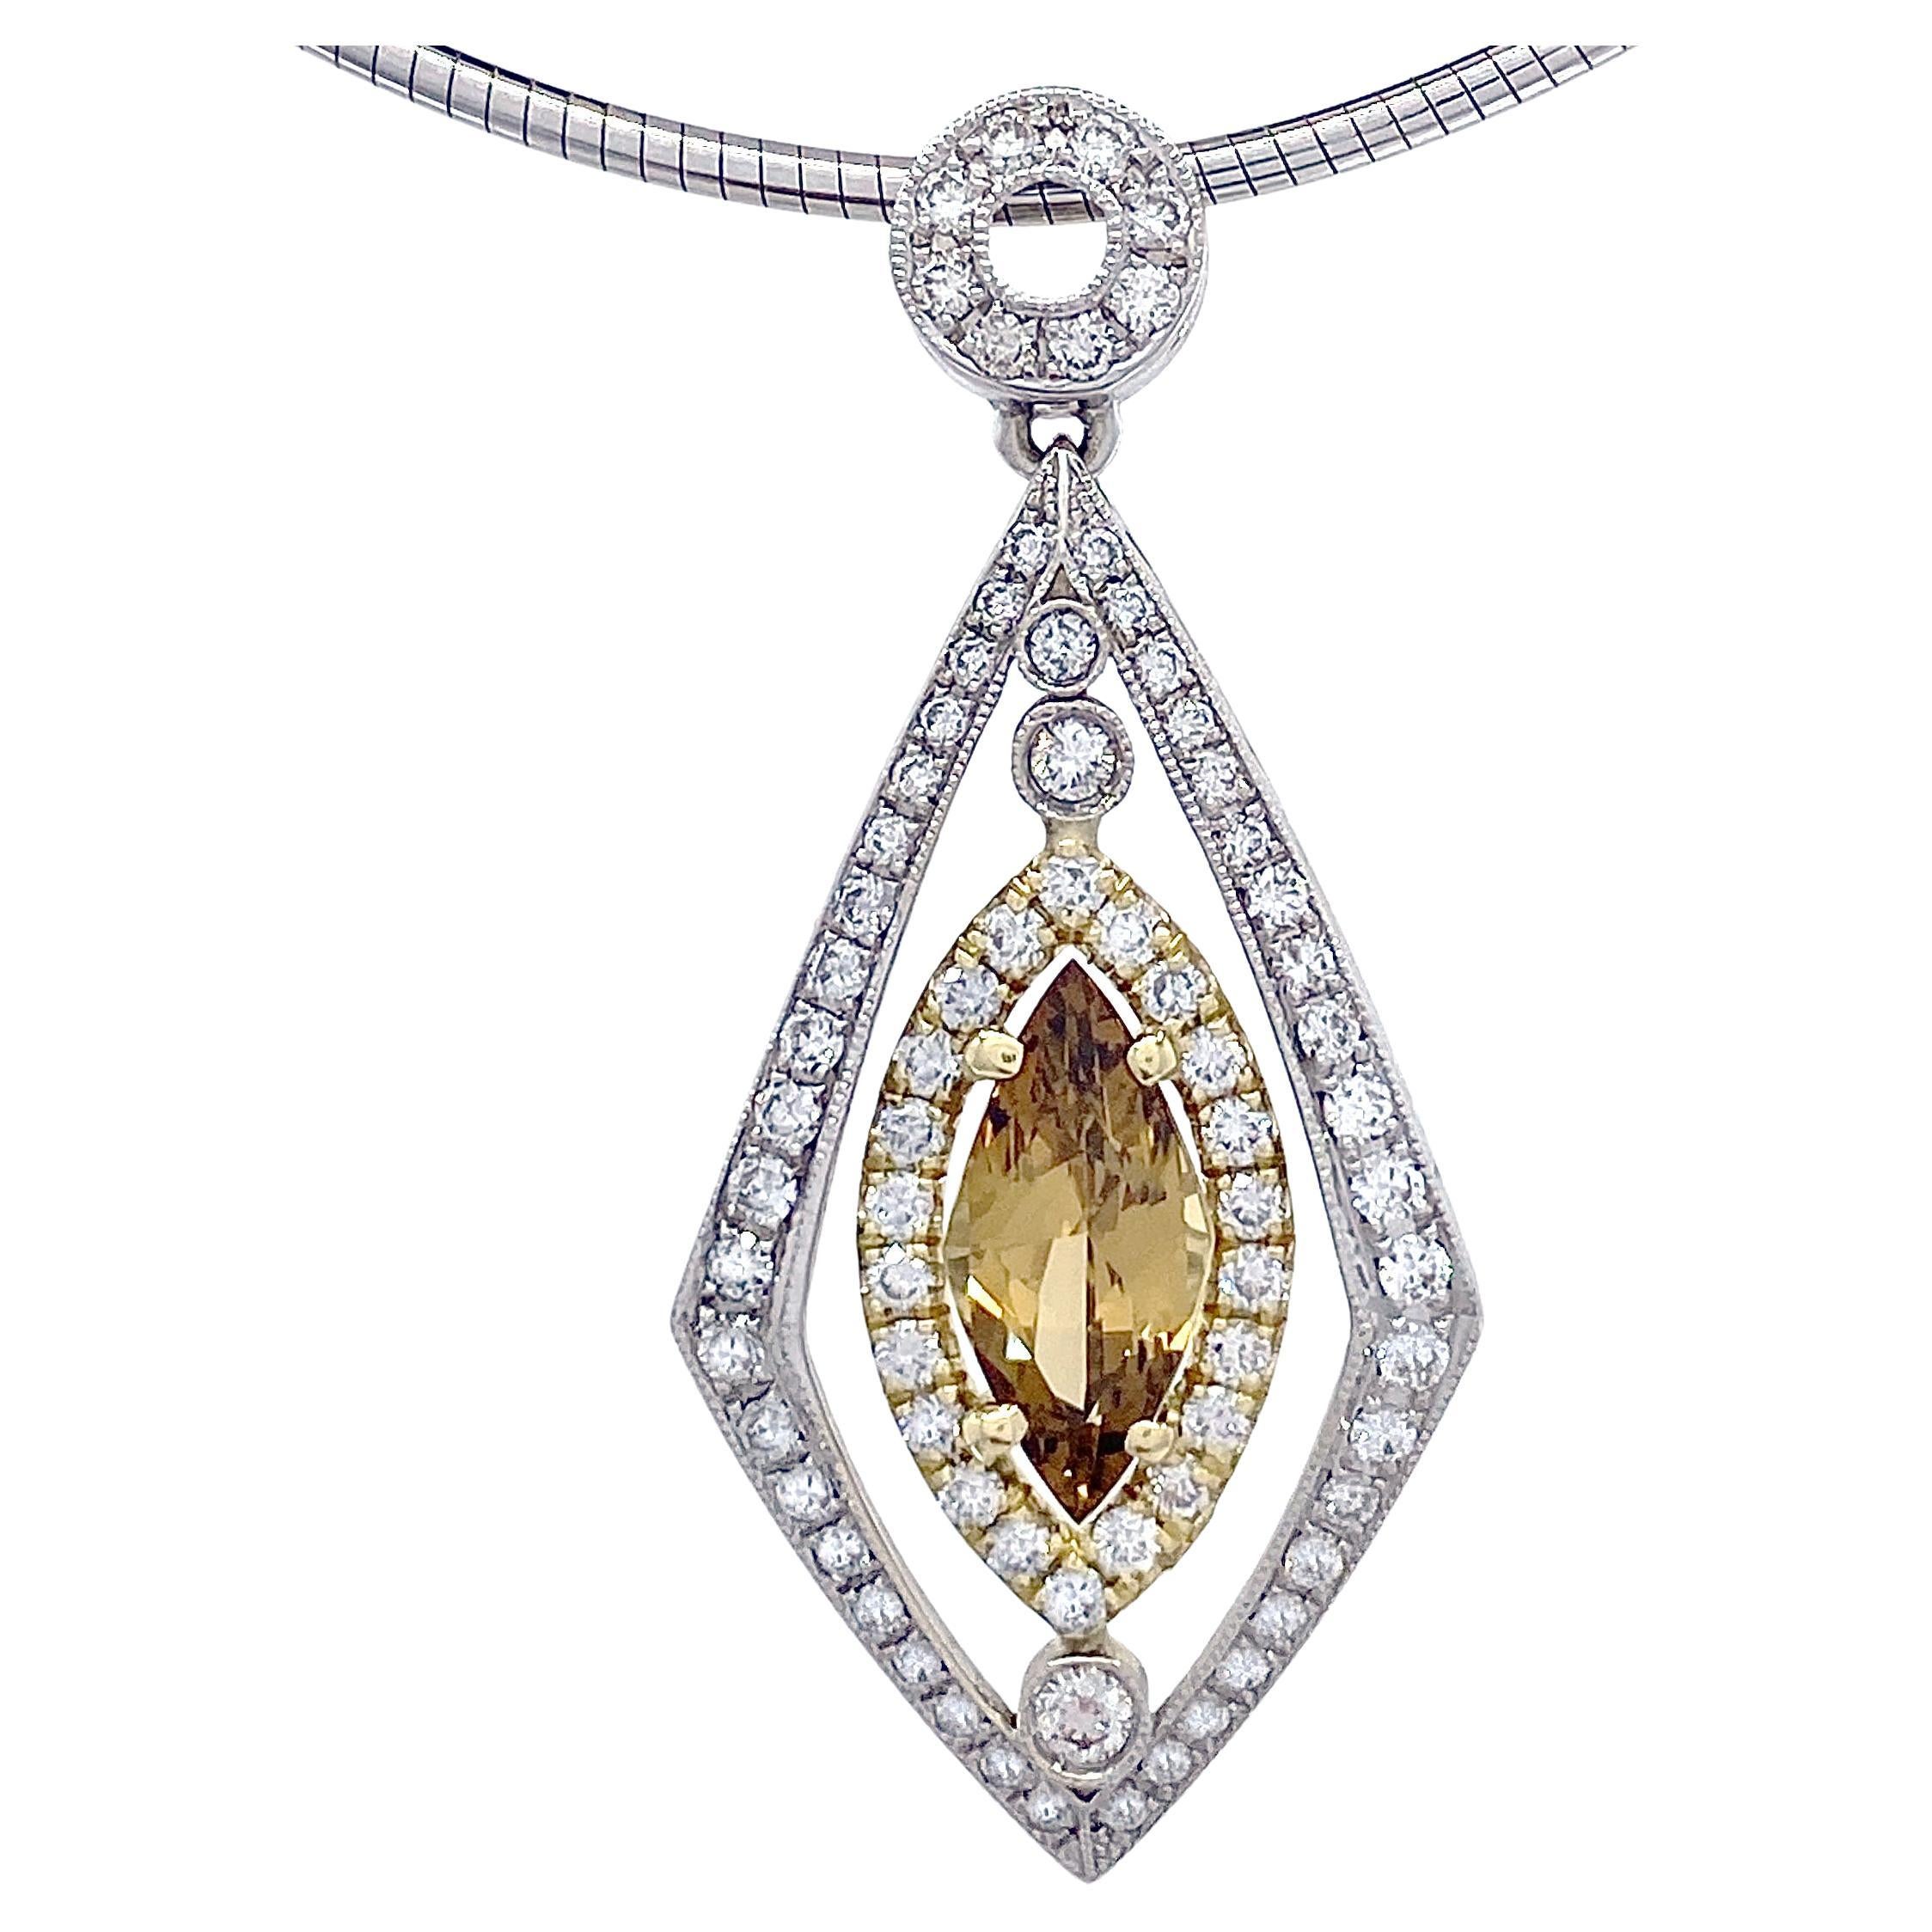 Diamond Pendant with 1.5 Carat Chrysoberyl on Omega Chain in White & Yellow Gold